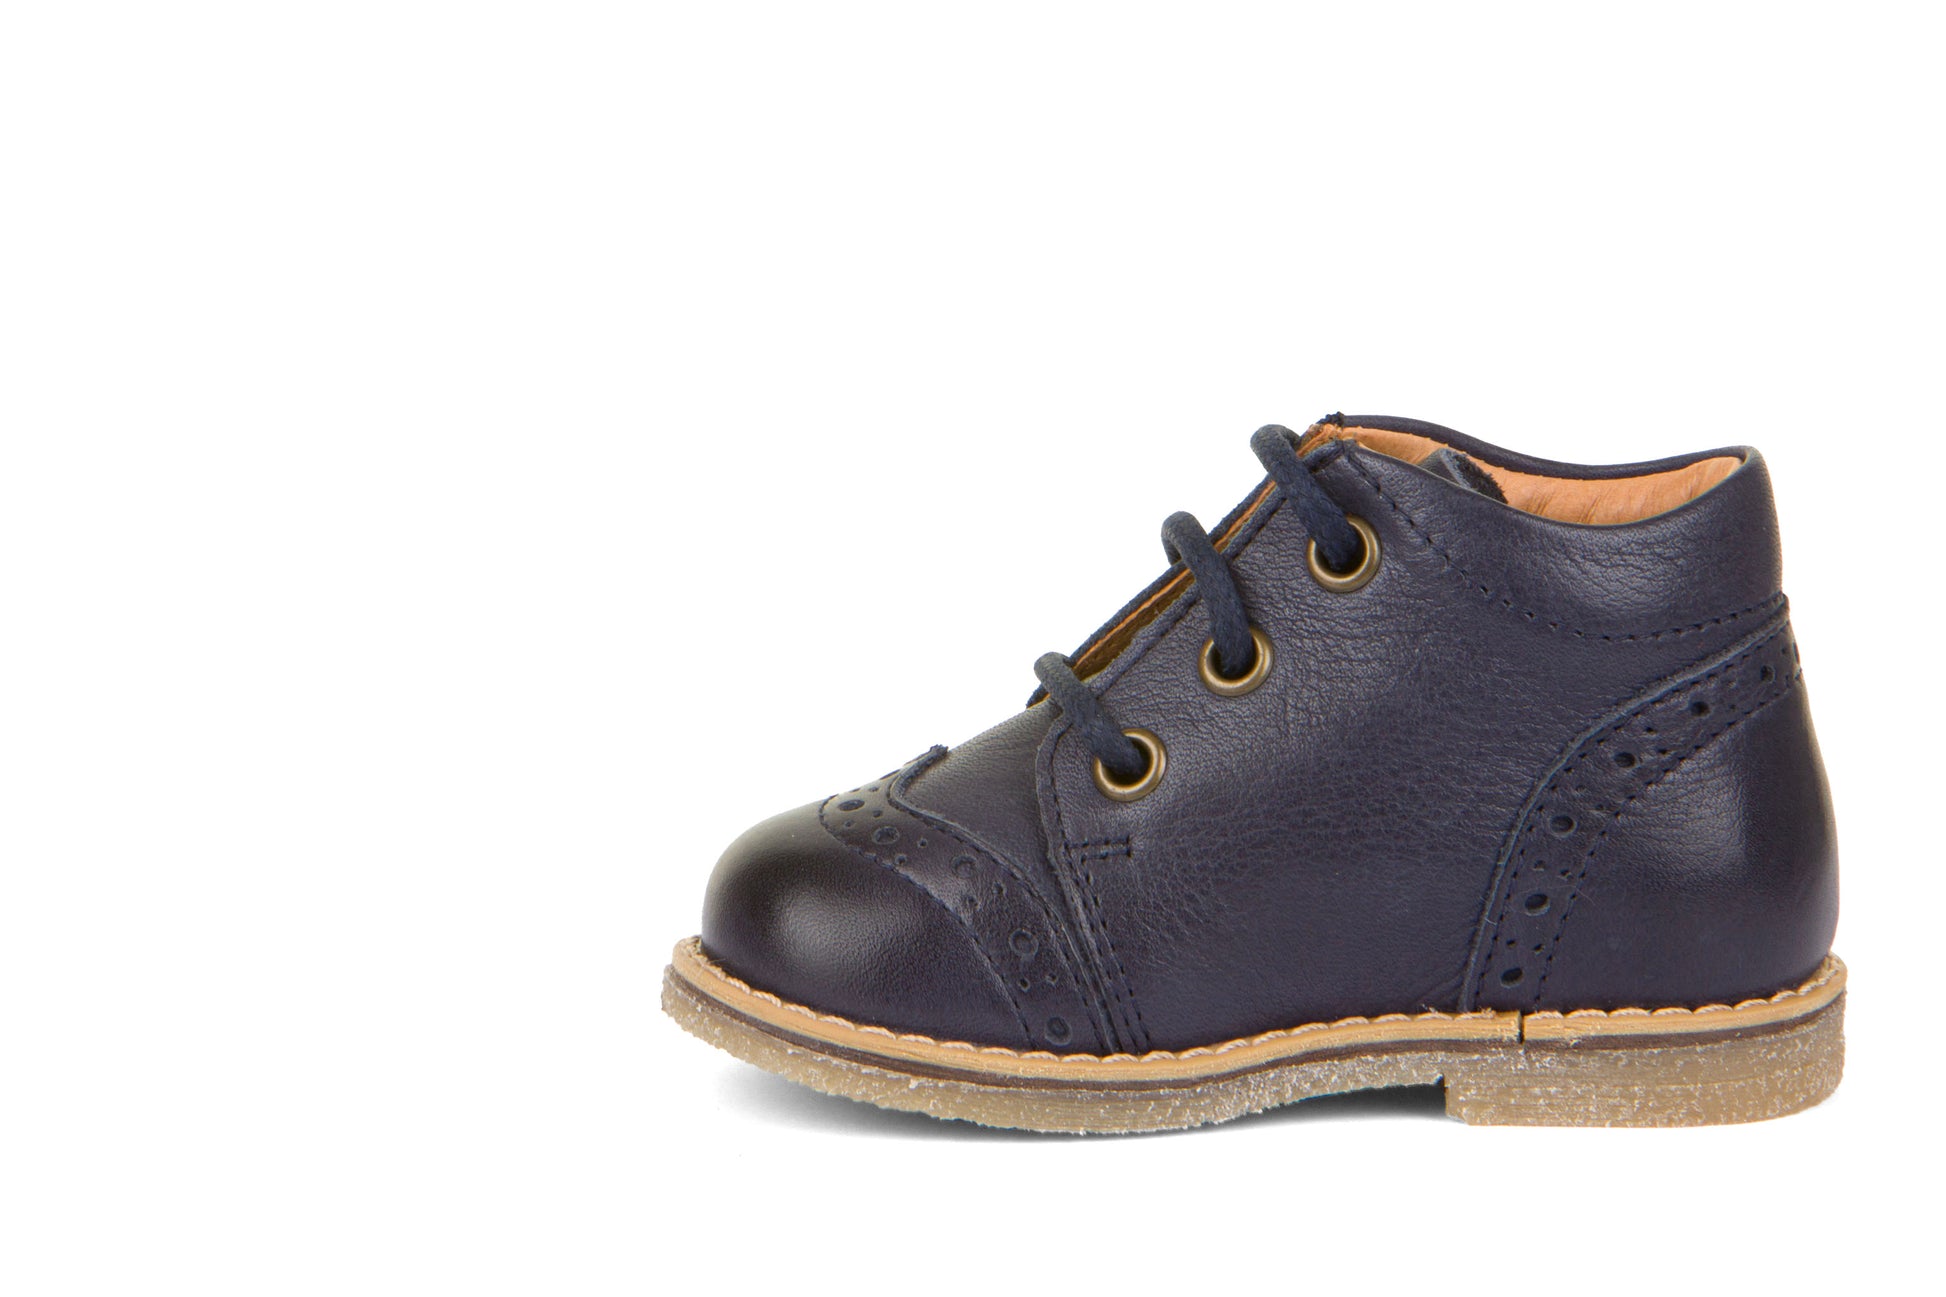 A boys boot by Froddo, style Coper G2130276-2 in Navy with lace-up fastening. Left side view.